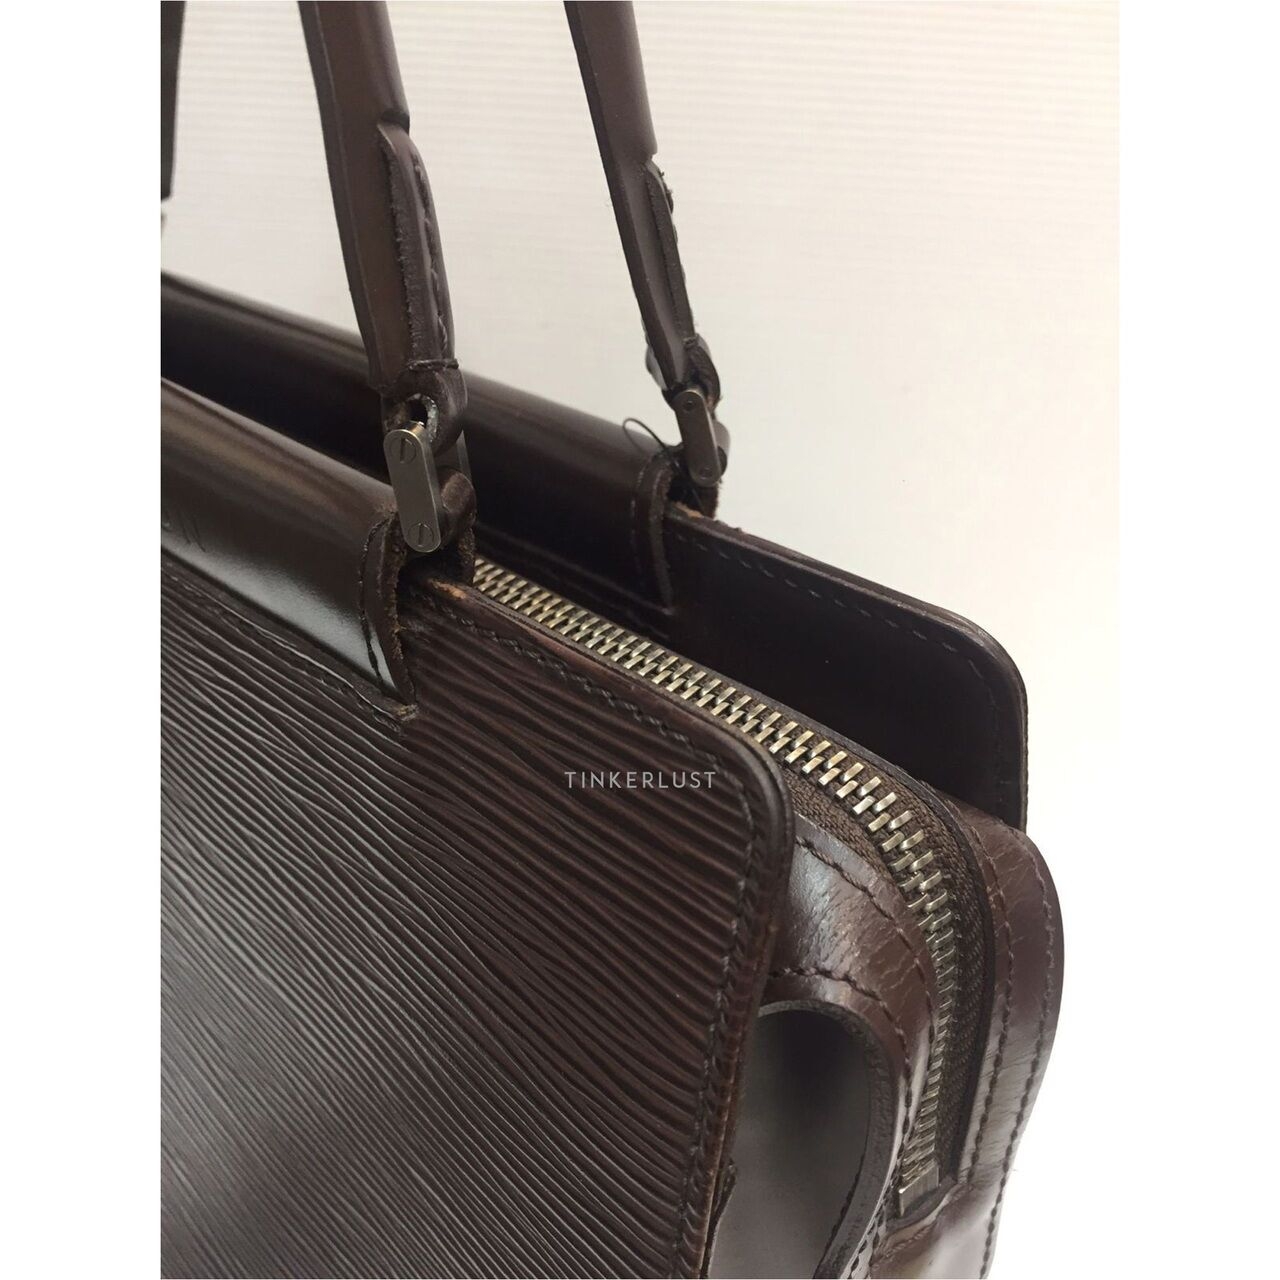 Louis Vuitton Figari MM Epi Leather Brown 2003 Tote Bag